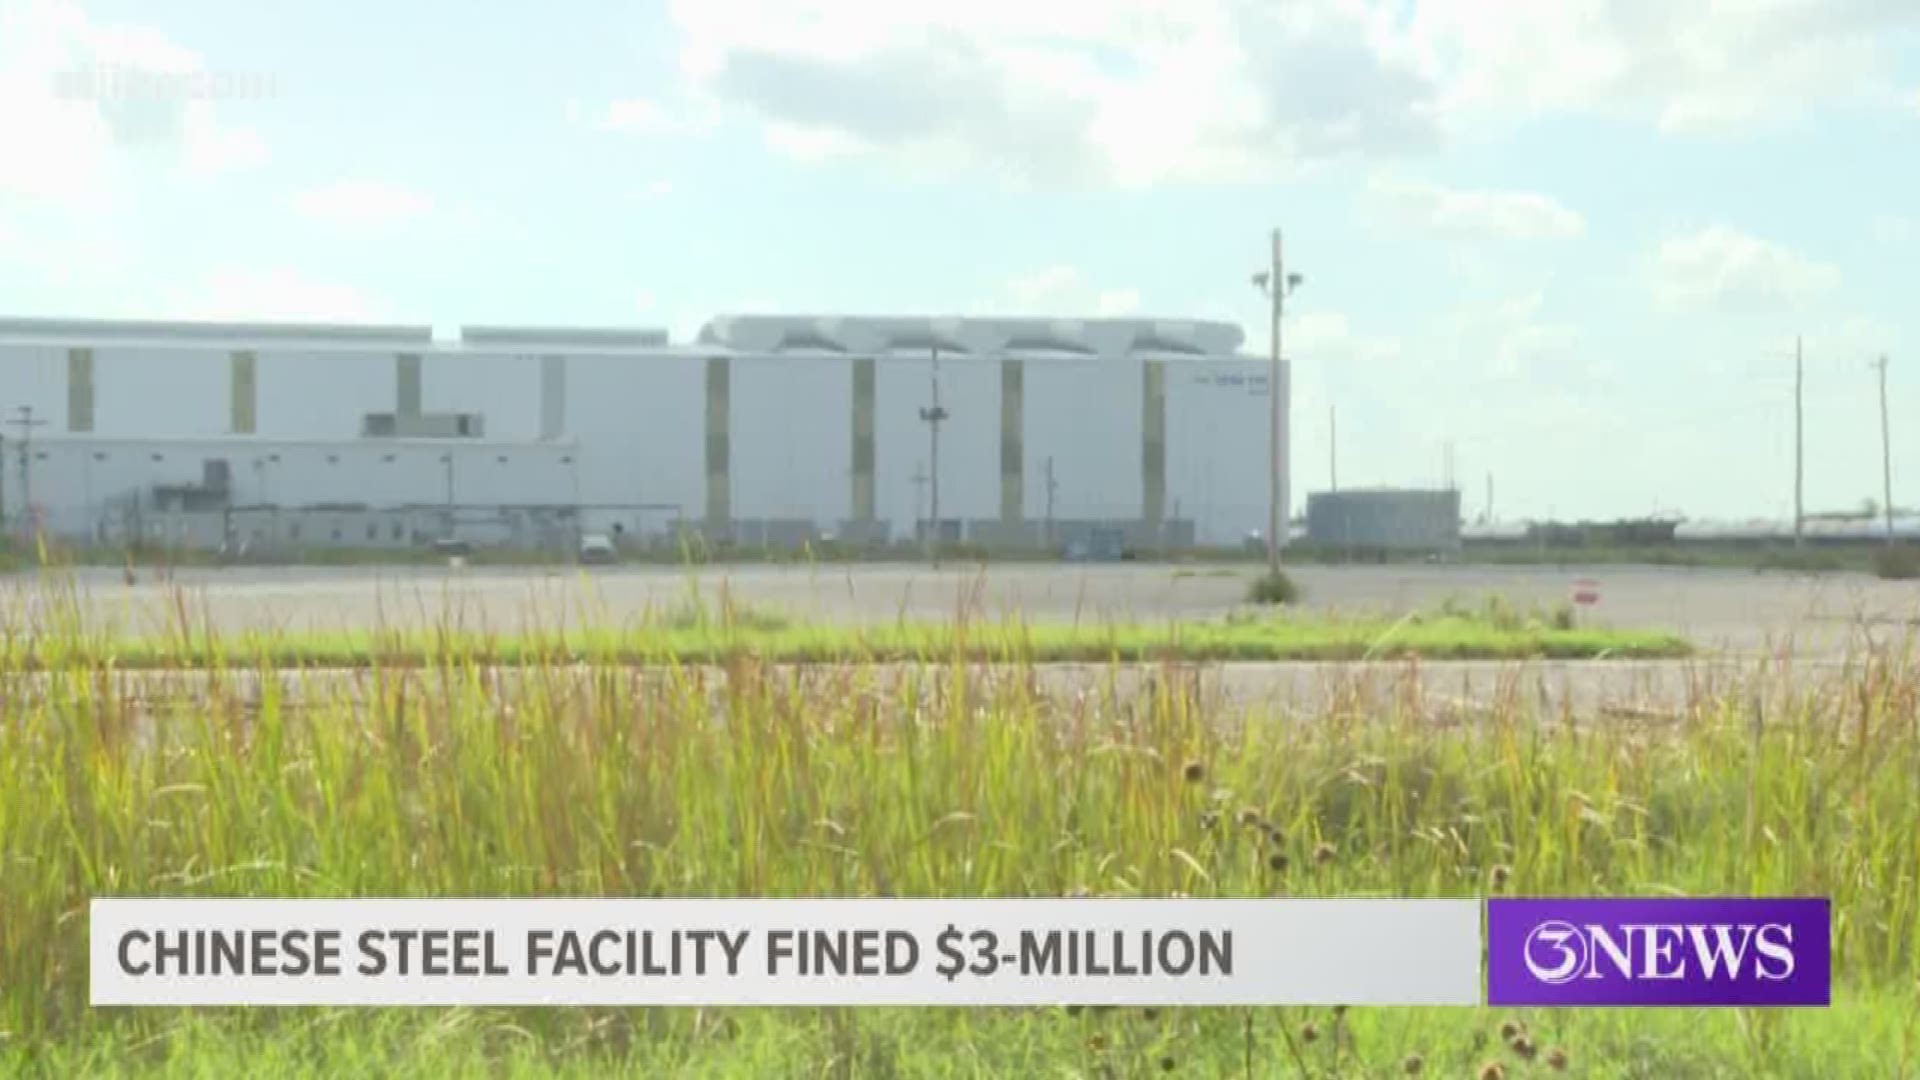 The Chinese steel pipe making facility near Gregory was forced to pay a fine of around $3 million for not complying with the tax abatement agreement it has with San Patricio County.